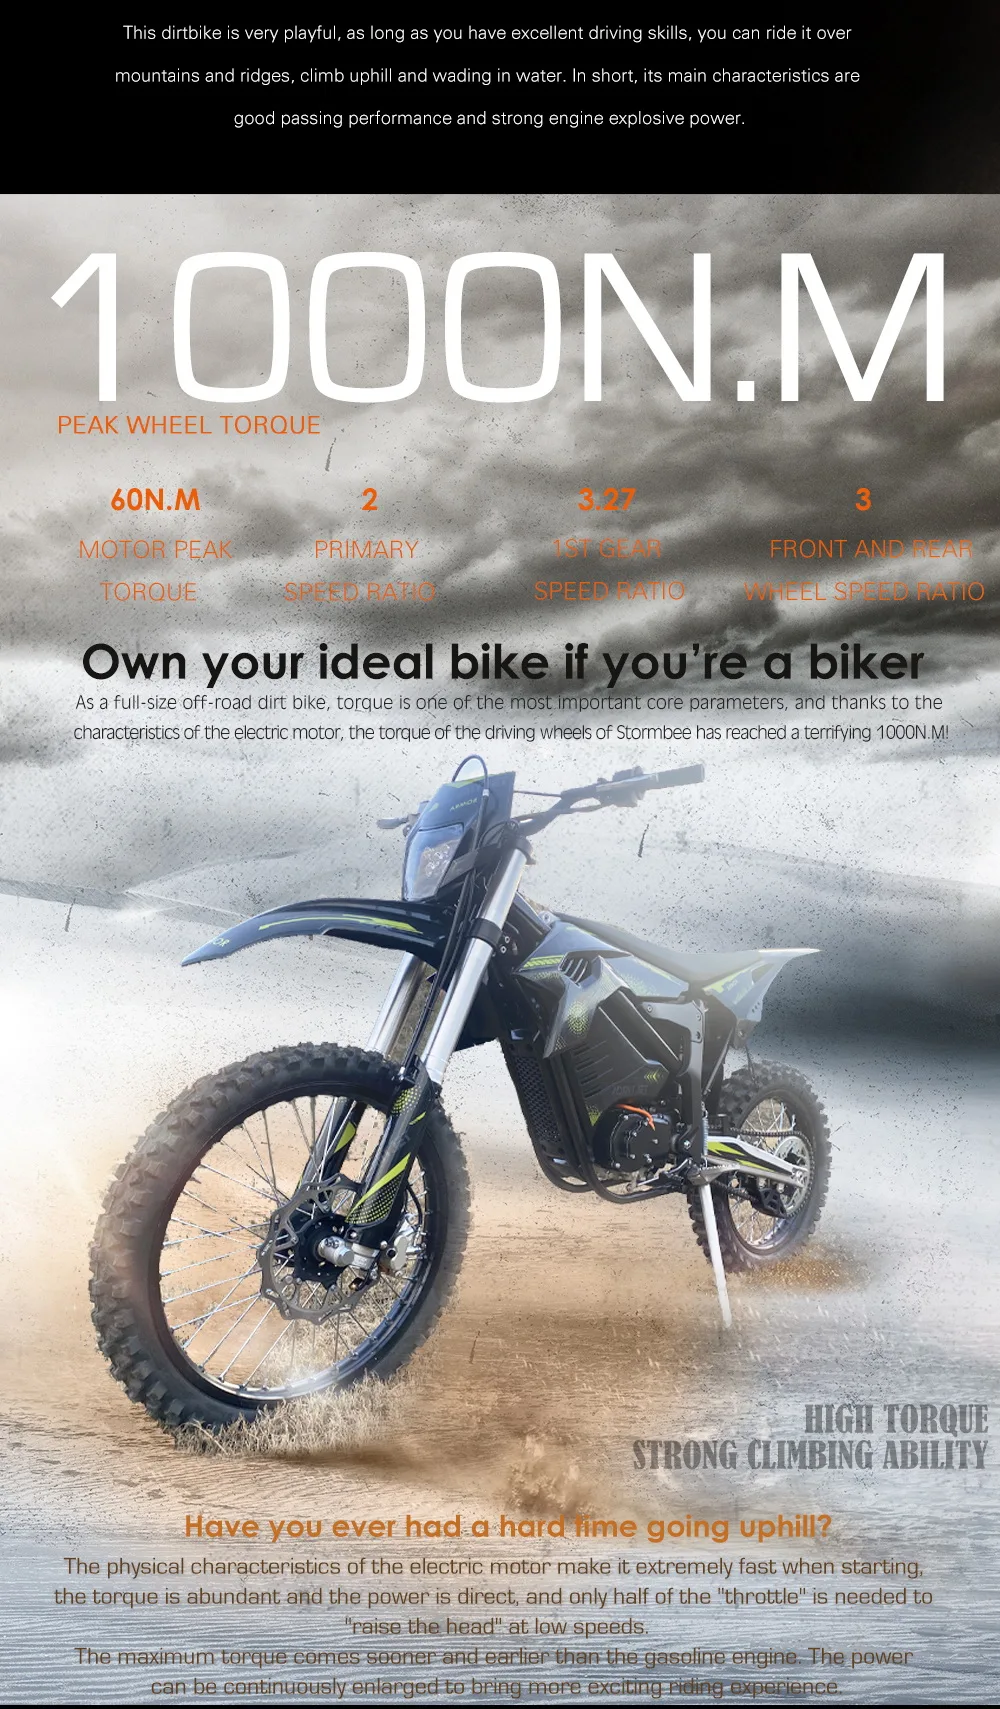 Full Size Electric Dirt Bike Most Powerful For Urban and Offroad